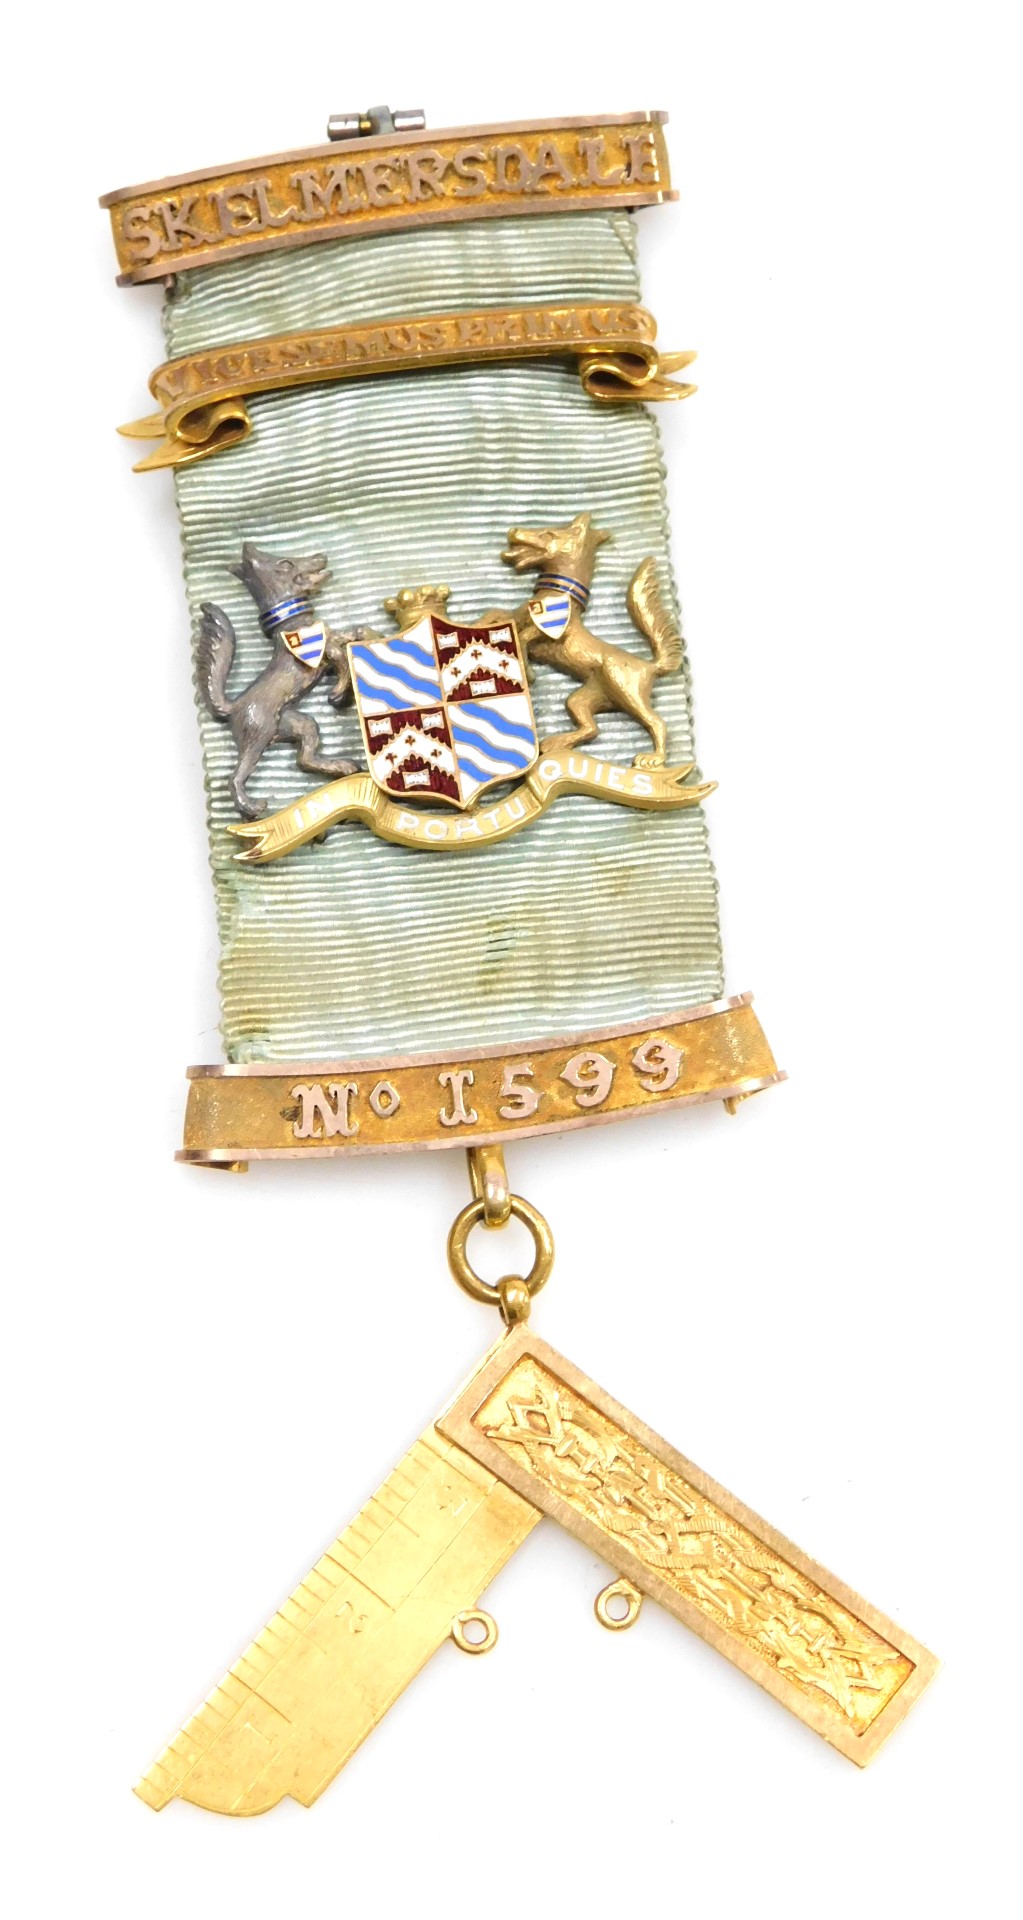 A Victorian Masonic jewel, for Skelmersdale number 1599 lodge, with moto and coat of arms, and 18ct